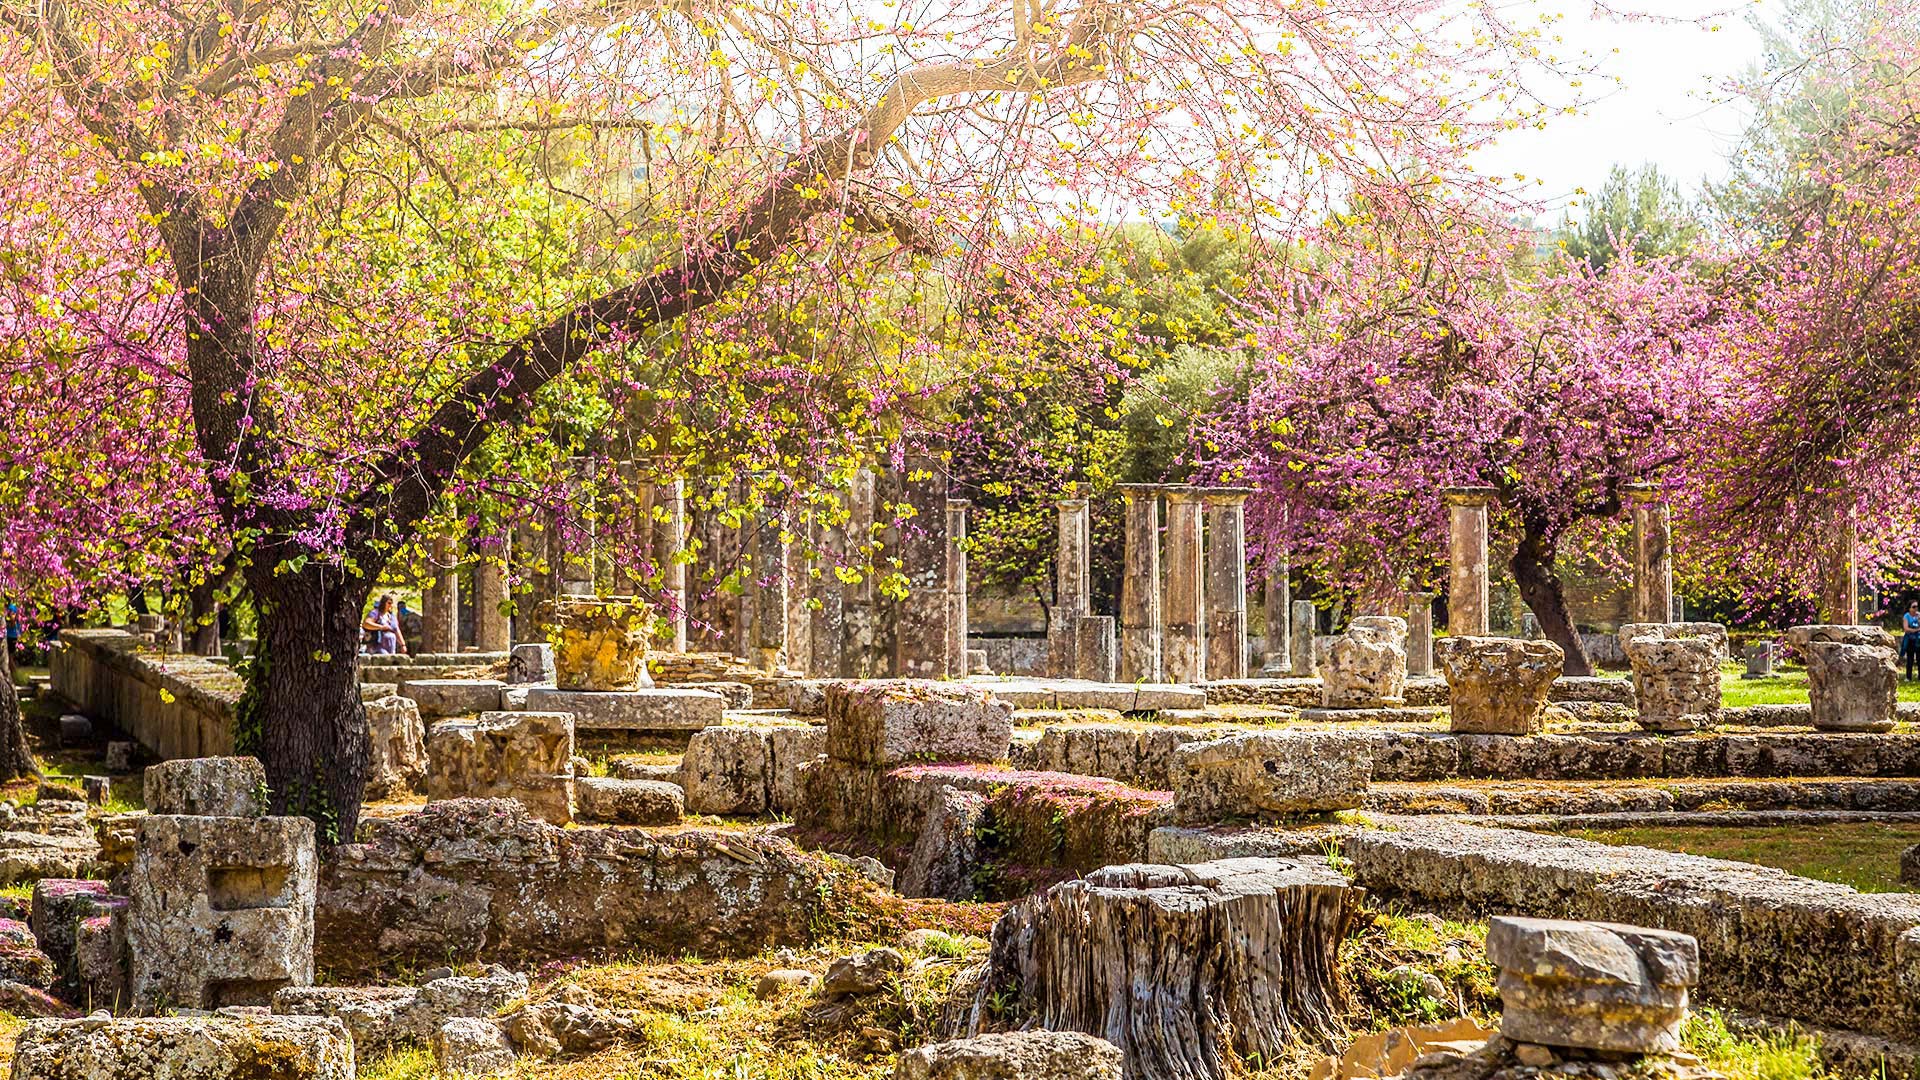 The best experience in Ancient Olympia, is in spring when the olive groves and flowers are in bloom